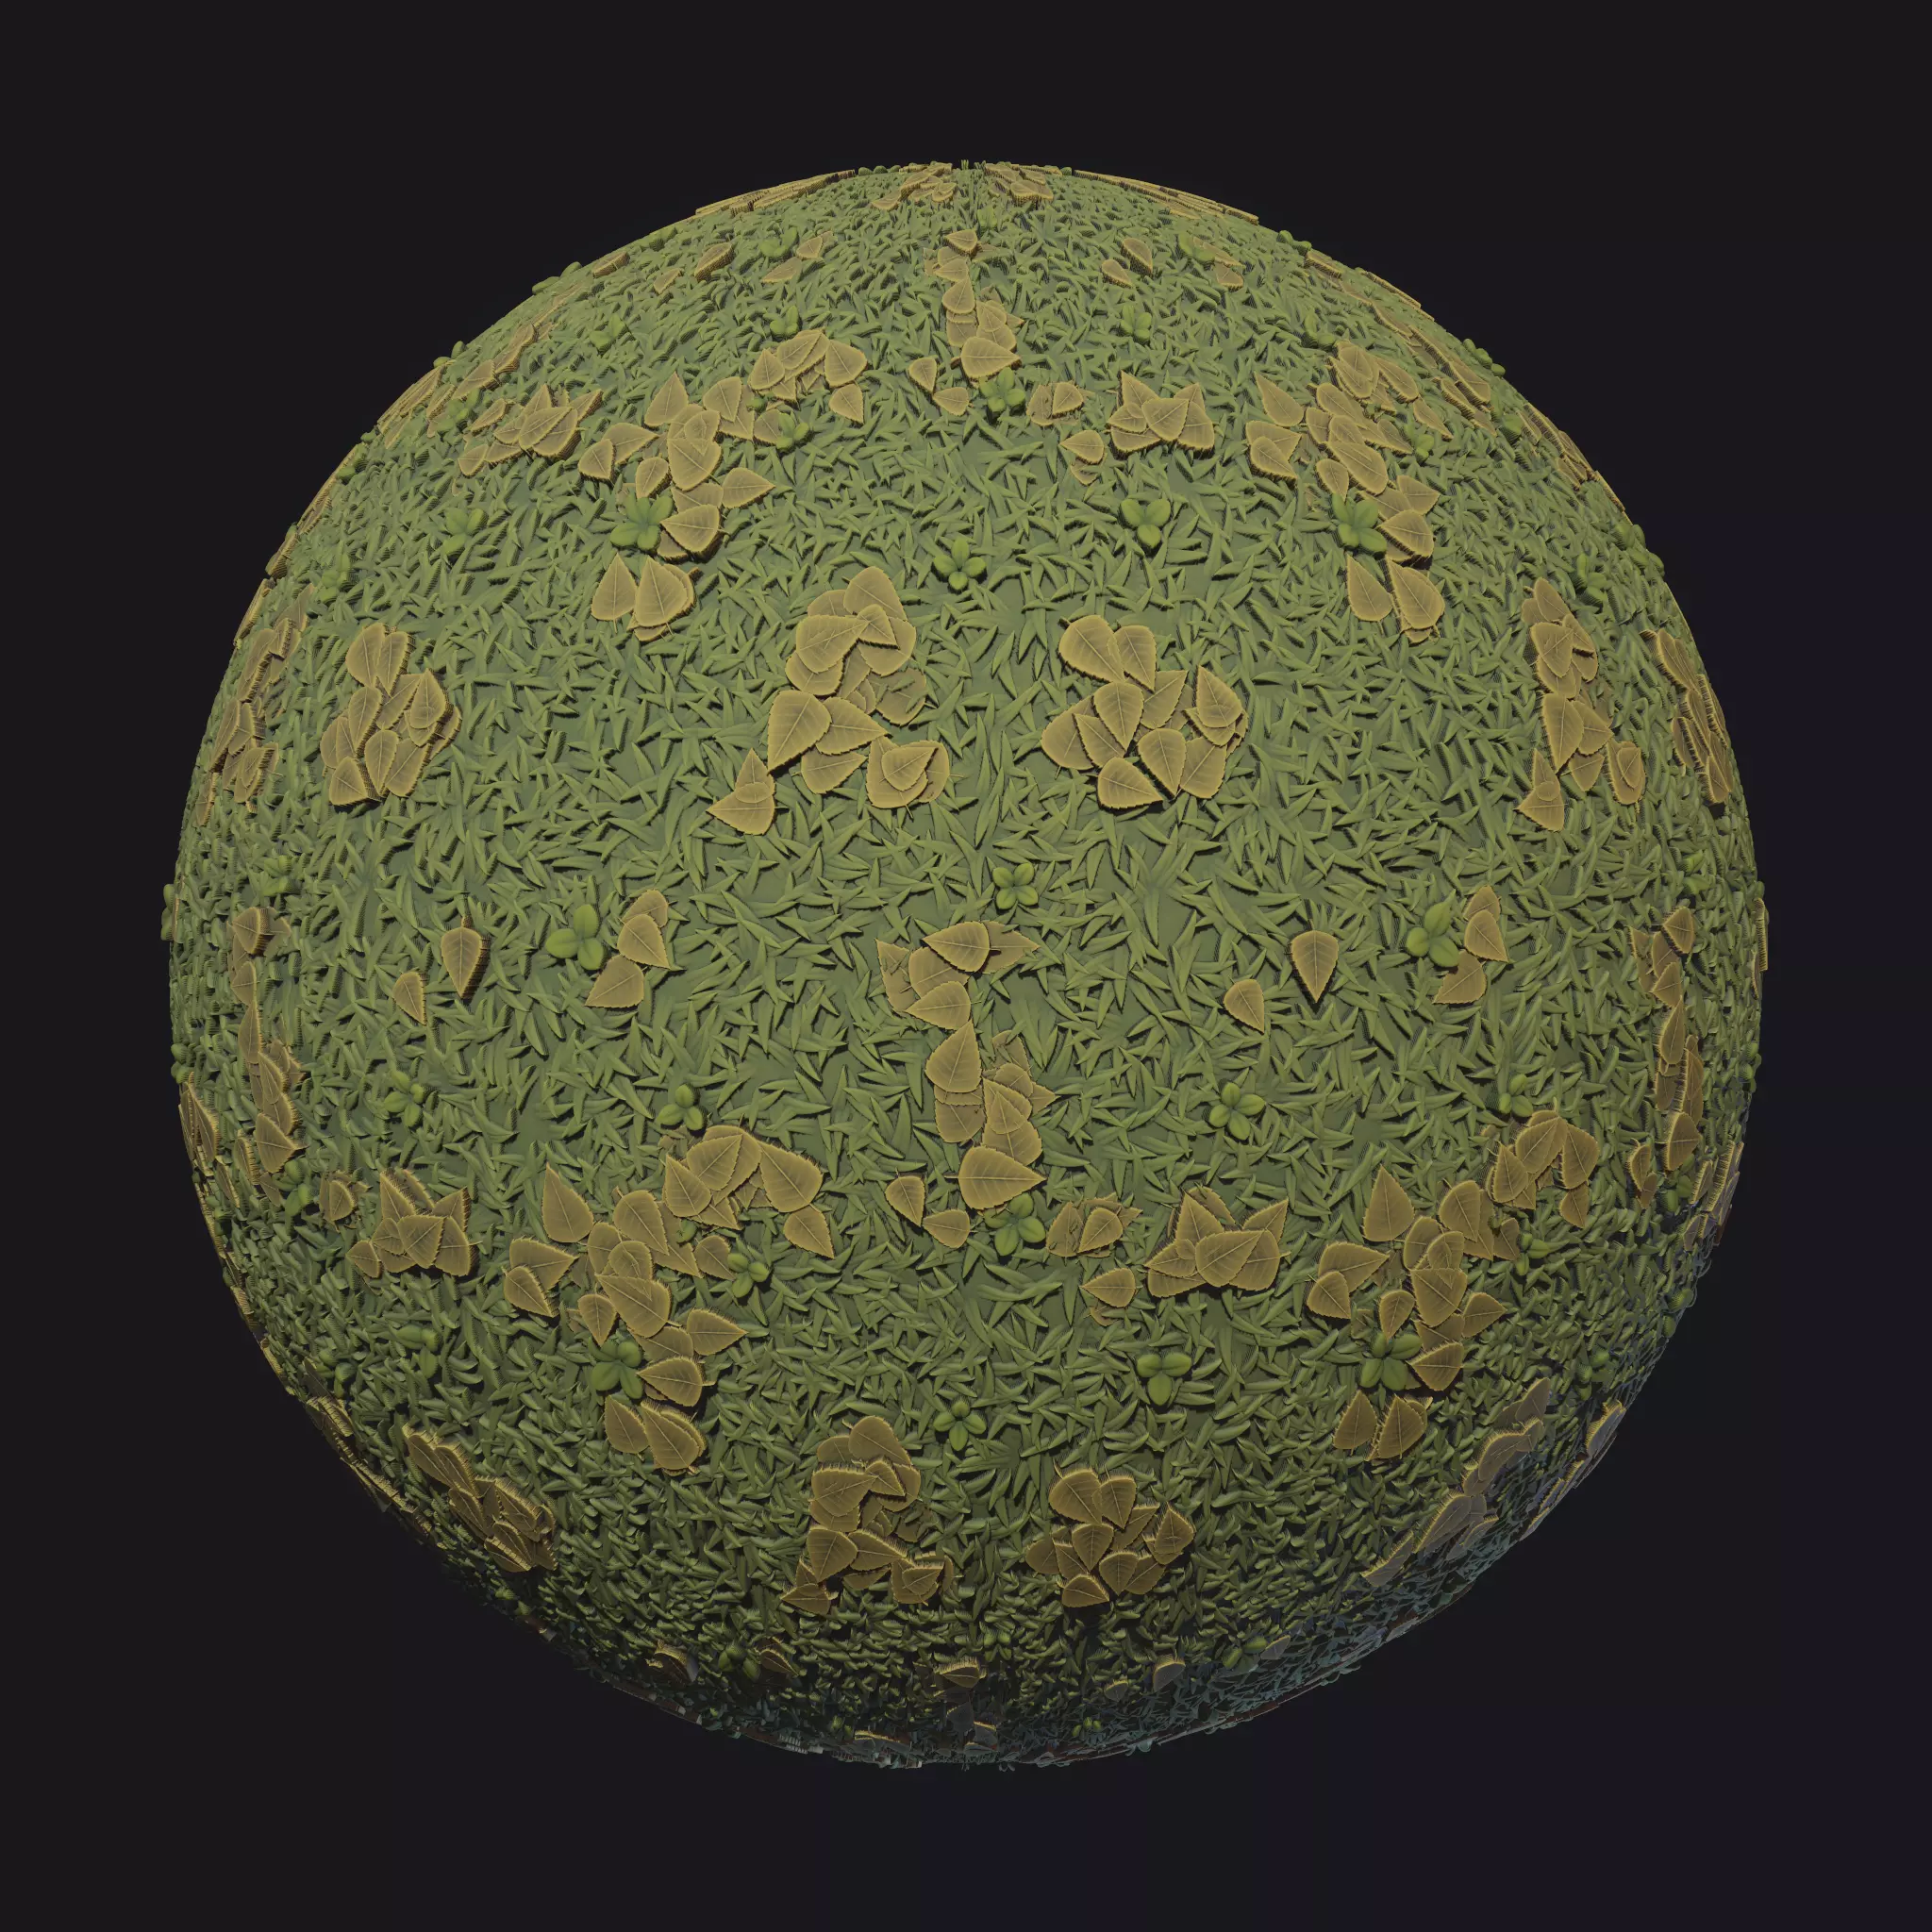 Distribution of the Stylized Terrain Textures asset 50 landscape textures on the Unity asset store - Longpost, Asset, Инди, Distribution, Development of, Gamedev, Indie game, Unity3d, Unity, Asset store